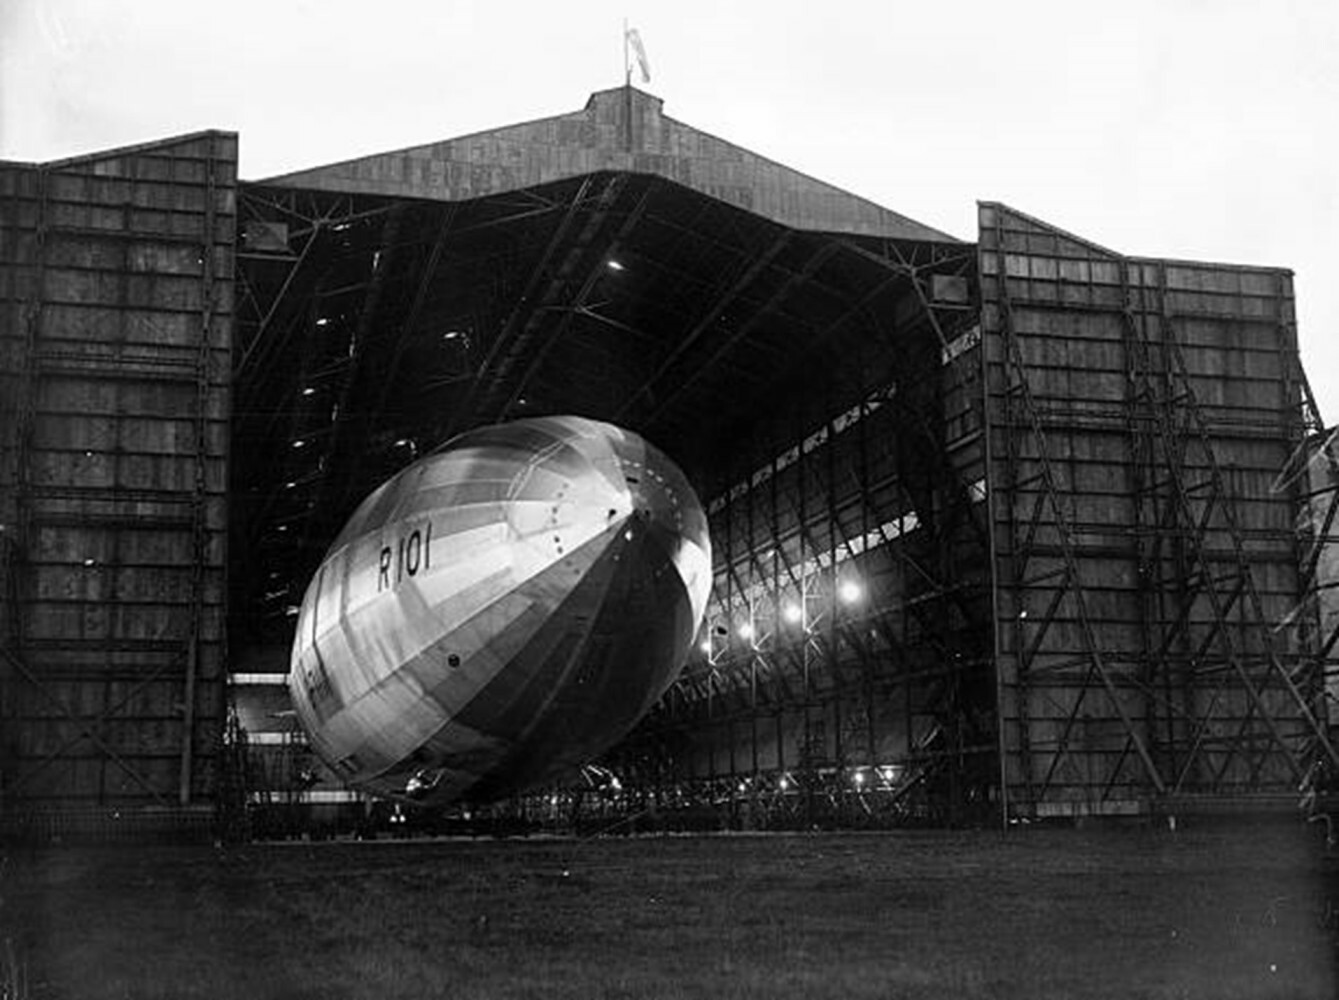 Researchers Quietly Cracked Zeppelin Ransomware Keys